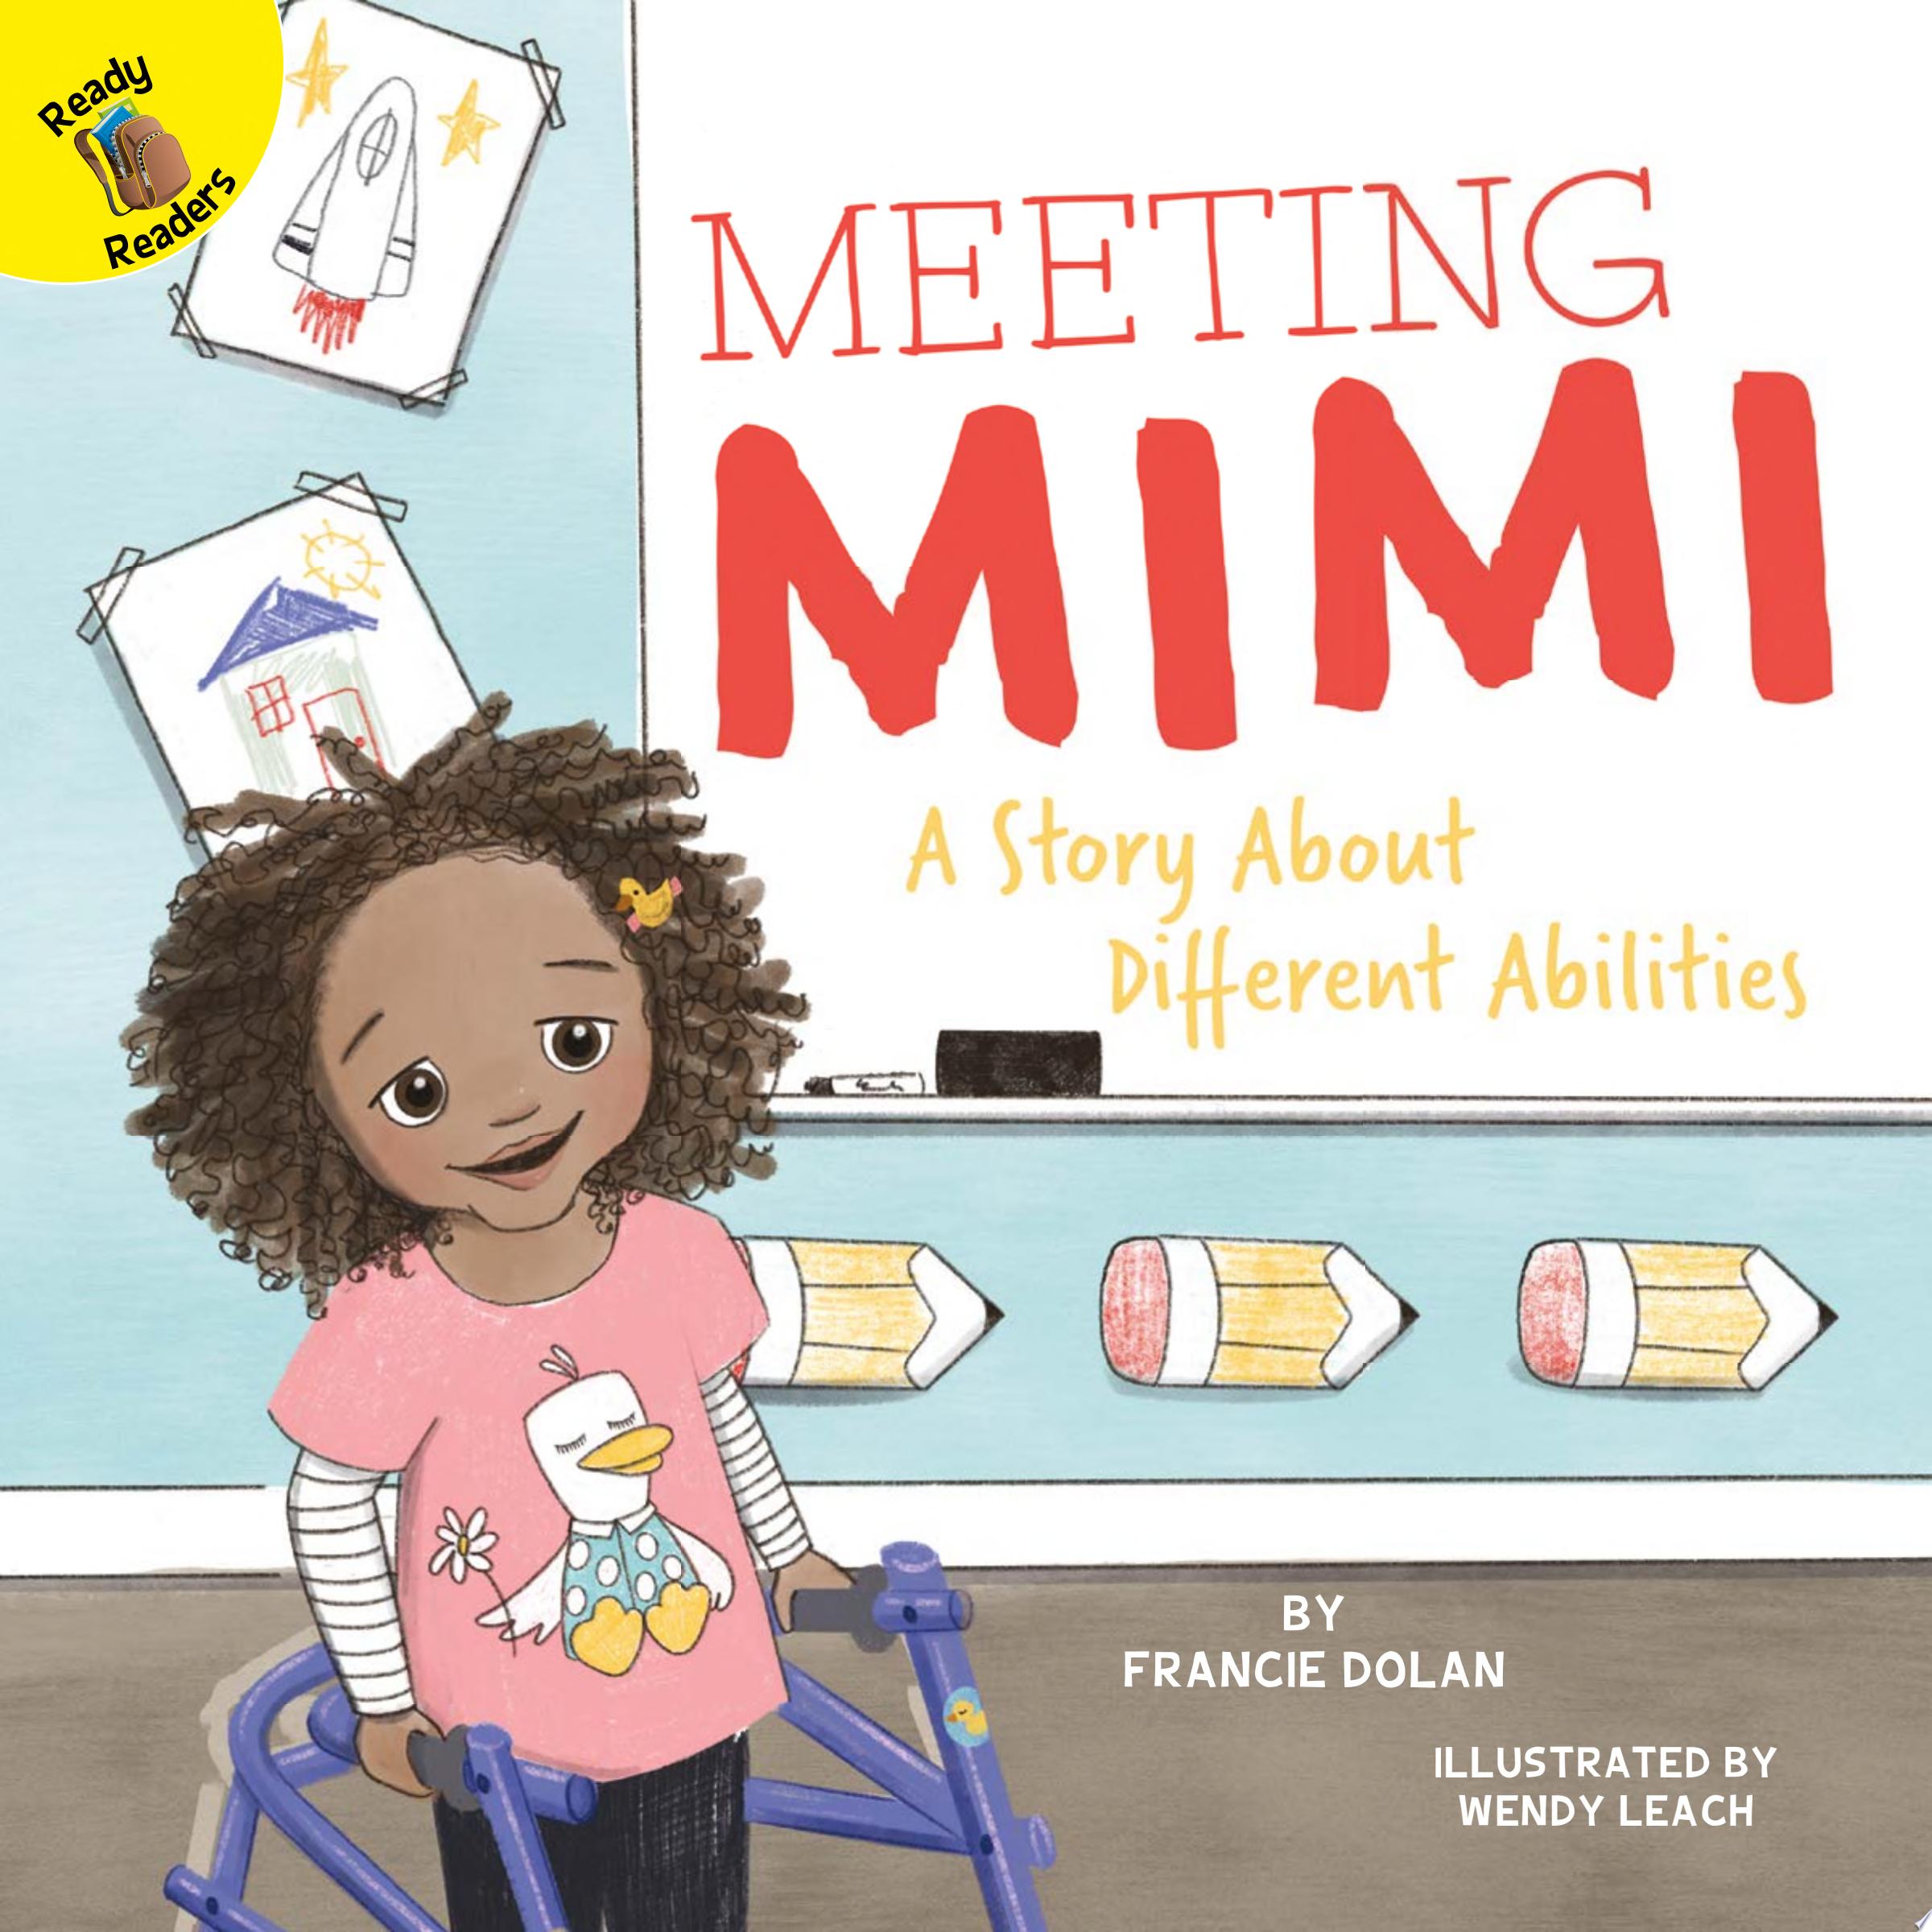 Image for "Meeting Mimi"